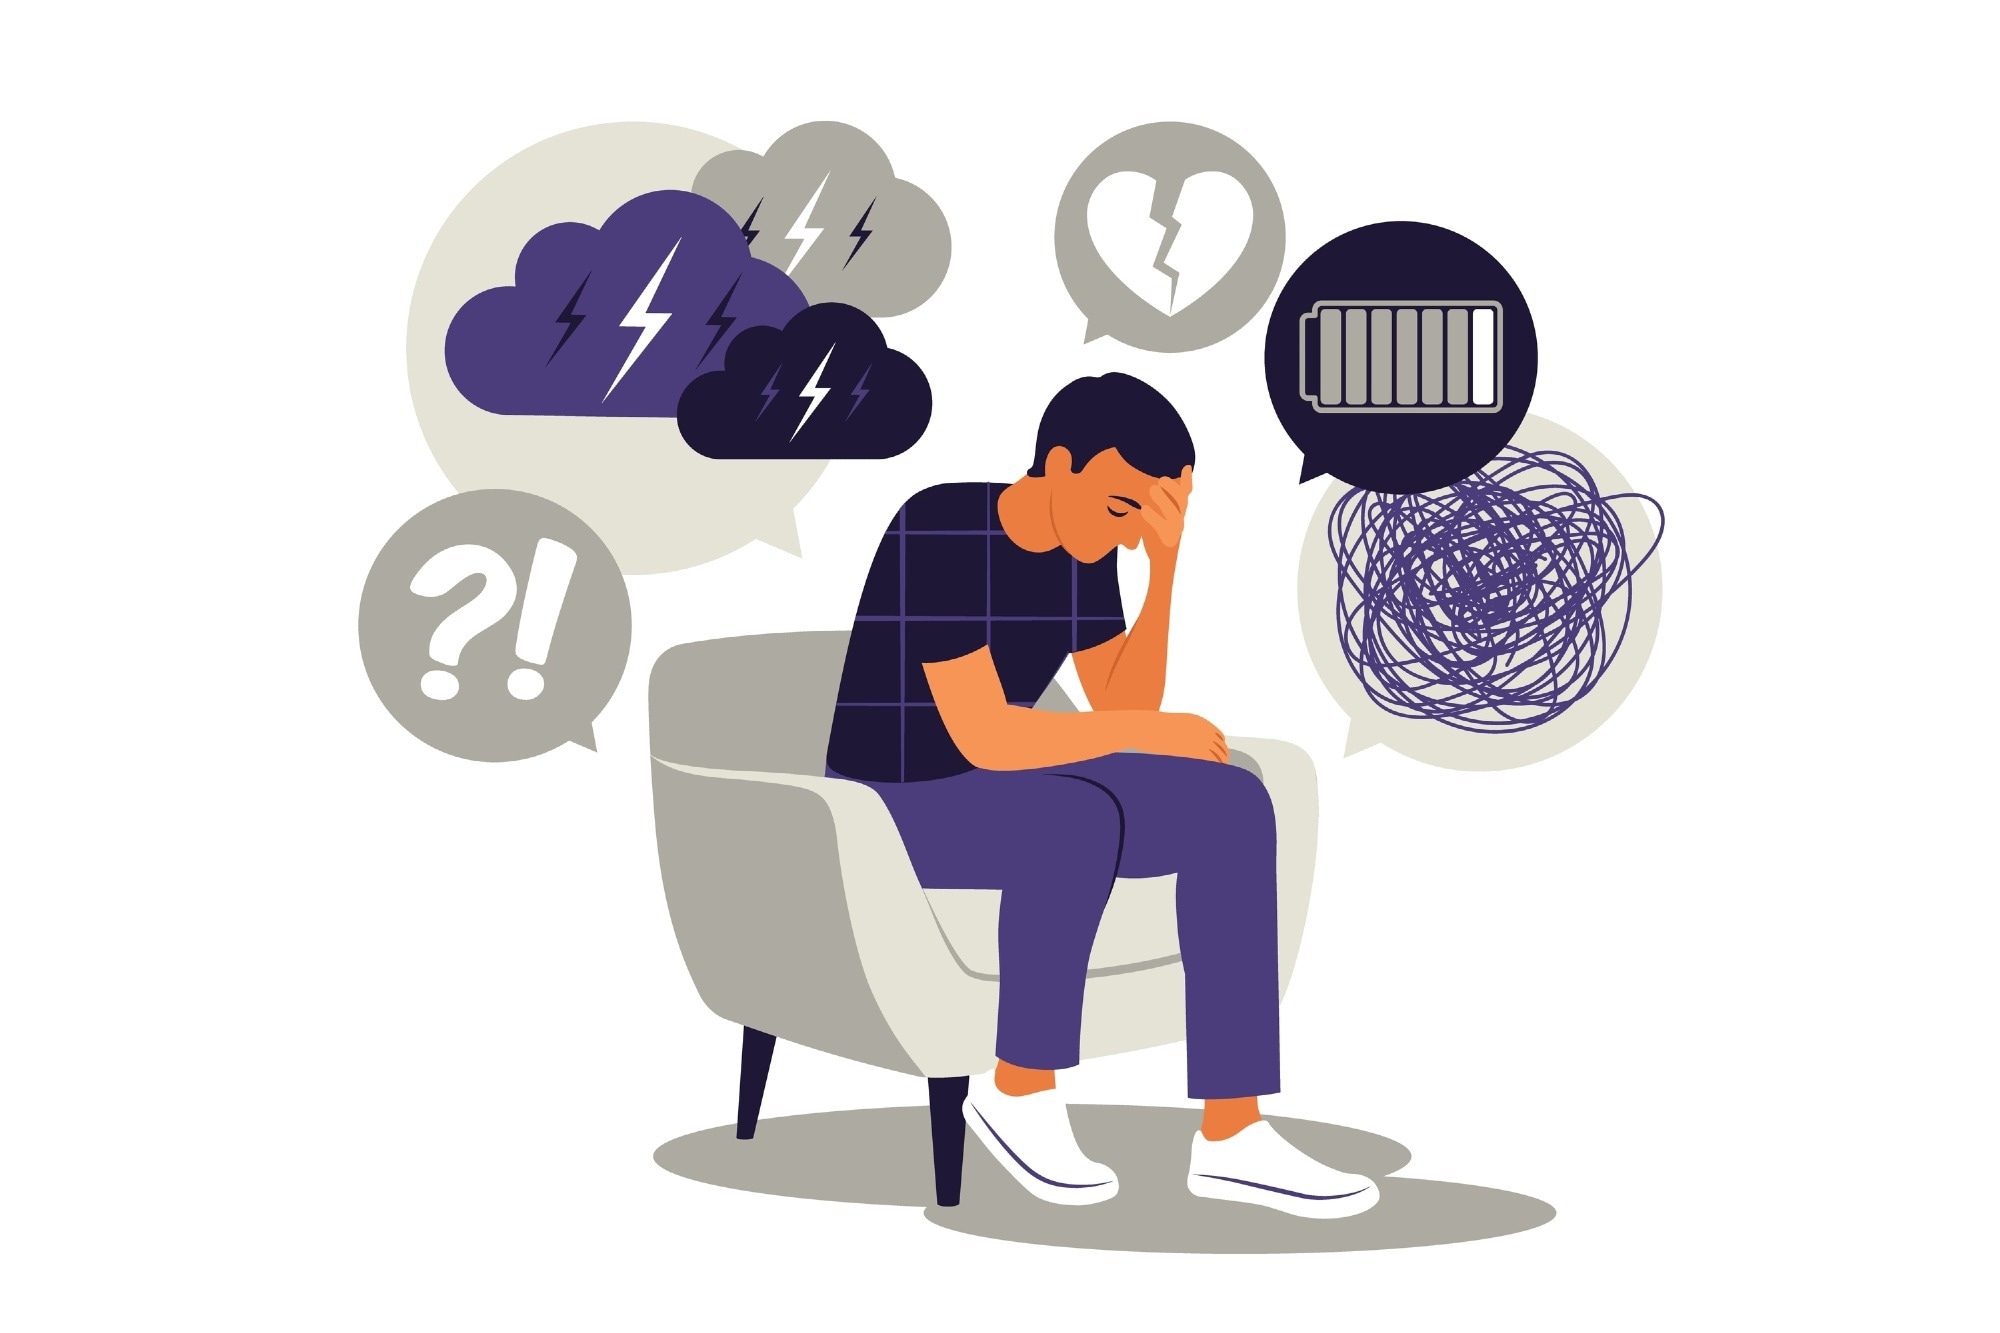 Study: Multi-site benchmark classification of major depressive disorder using machine learning on cortical and subcortical measures. Image Credit: Elena Kalinicheva/Shutterstock.com